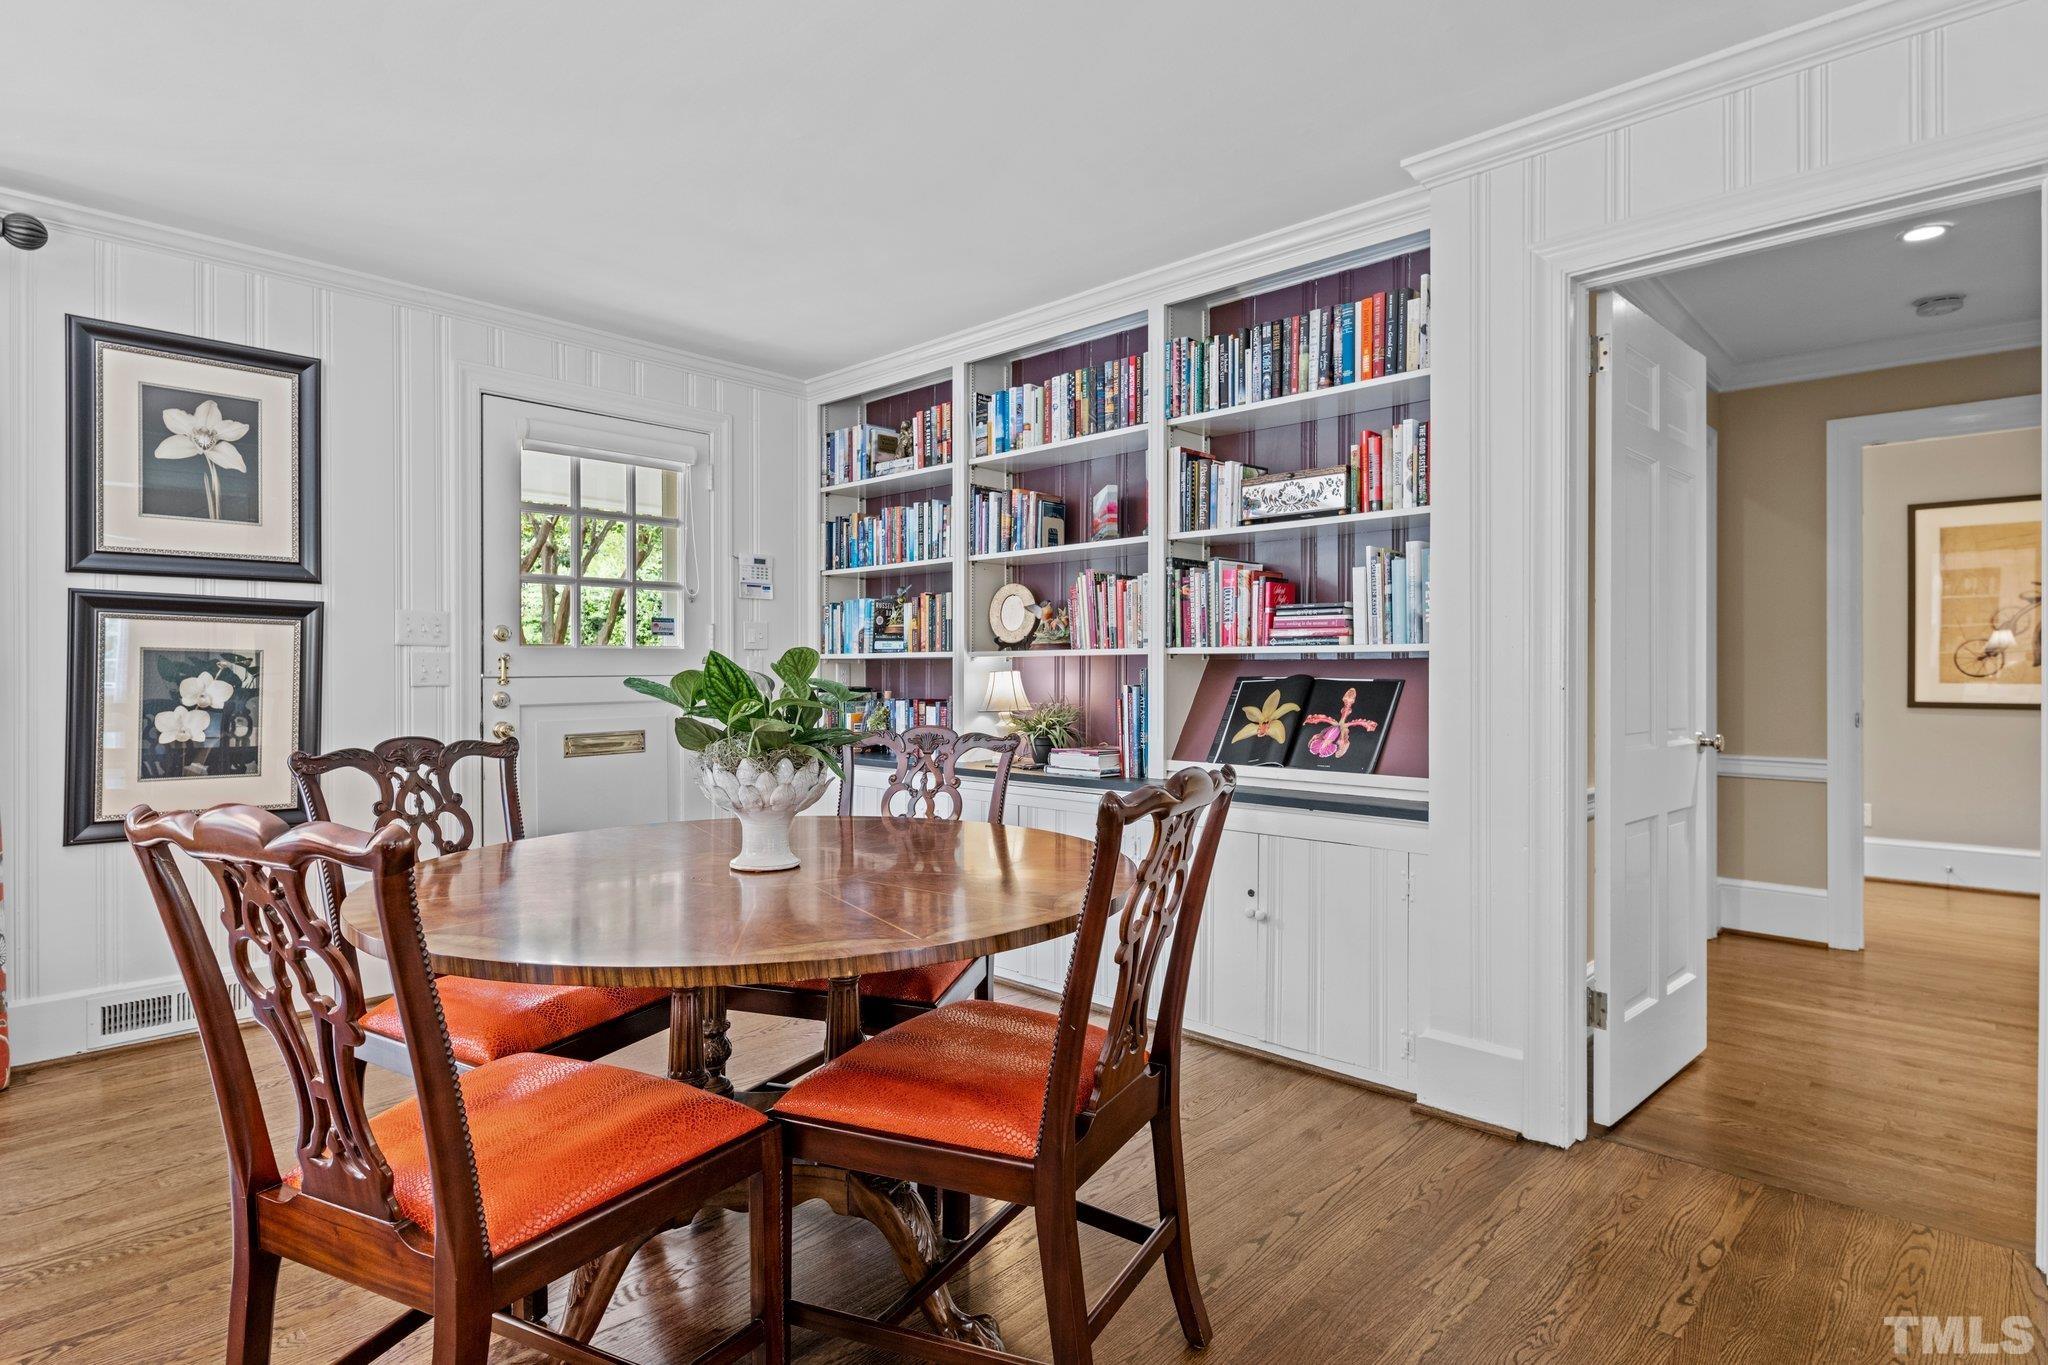 Breakfast Area in the Family Room with built-in bookshelves along the wall and Dutch Door to backyard.